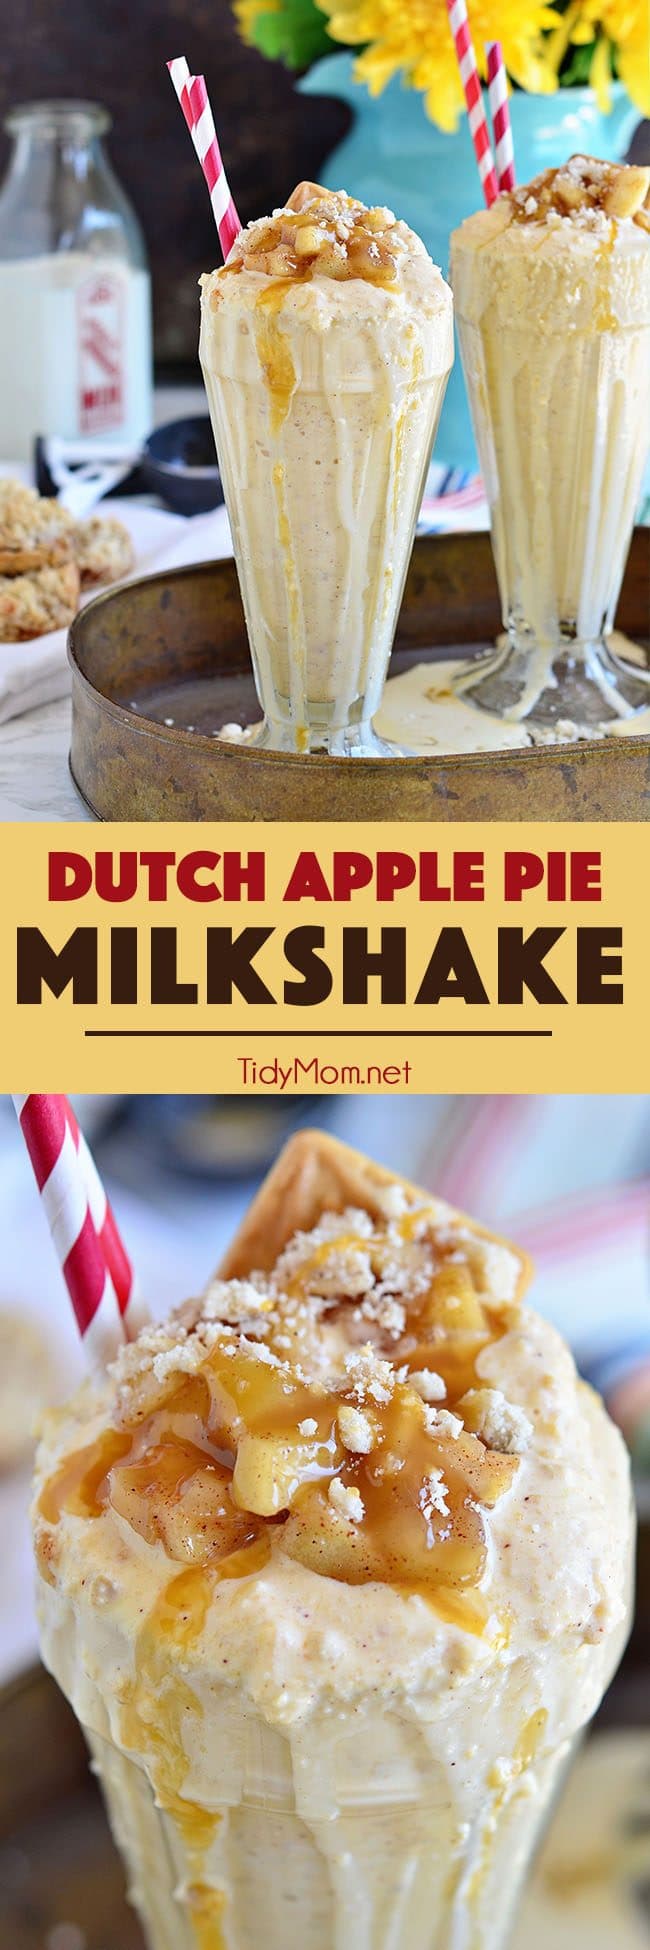 No plate and fork needed for this apple pie a la mode! A cool and creamy DUTCH APPLE PIE MILKSHAKE is the perfect blend of creamy vanilla ice cream, apple pie filling, and crumb topping. Recipe at Tidymom.net